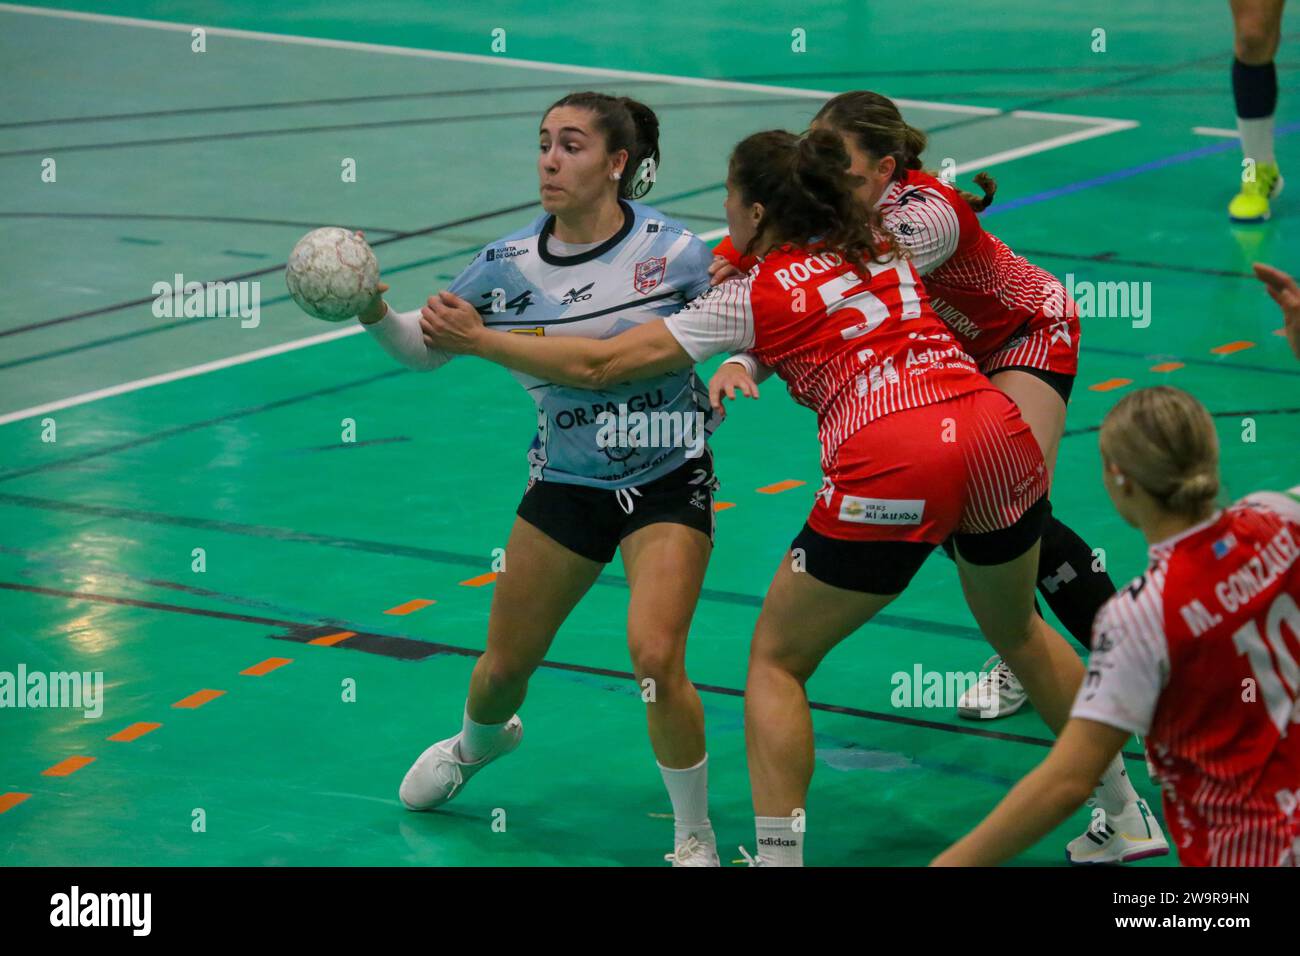 Gijon, Spain, 29th December, 2023: Mecalia Atletico Guardes player, Elena Amores (24, L) with the ball before the grab of Rocio Rojas (57, R) during the 13th matchday of the Liga Guerreras Iberdrola 2023-24 between the Motive.co Gijon Balonmano La Calzada and the Mecalia Atletico Guardes, on December 29, 2023, at the La Arena Pavilion, in Gijon, Spain. Credit: Alberto Brevers / Alamy Live News. Stock Photo